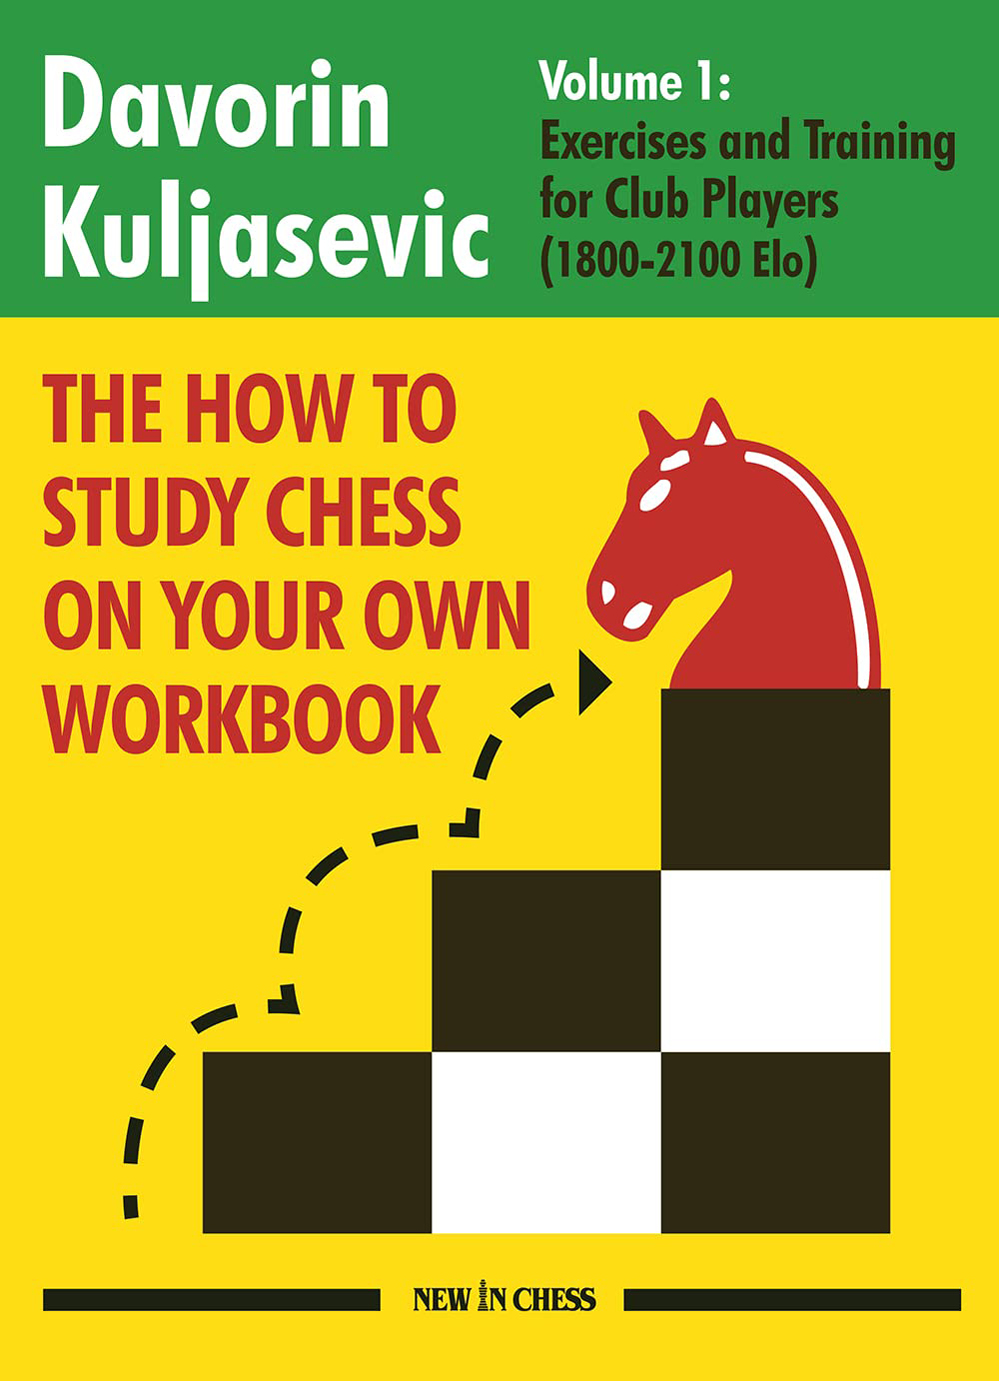 How to Study Chess on Your Own Workbook Vol. 1